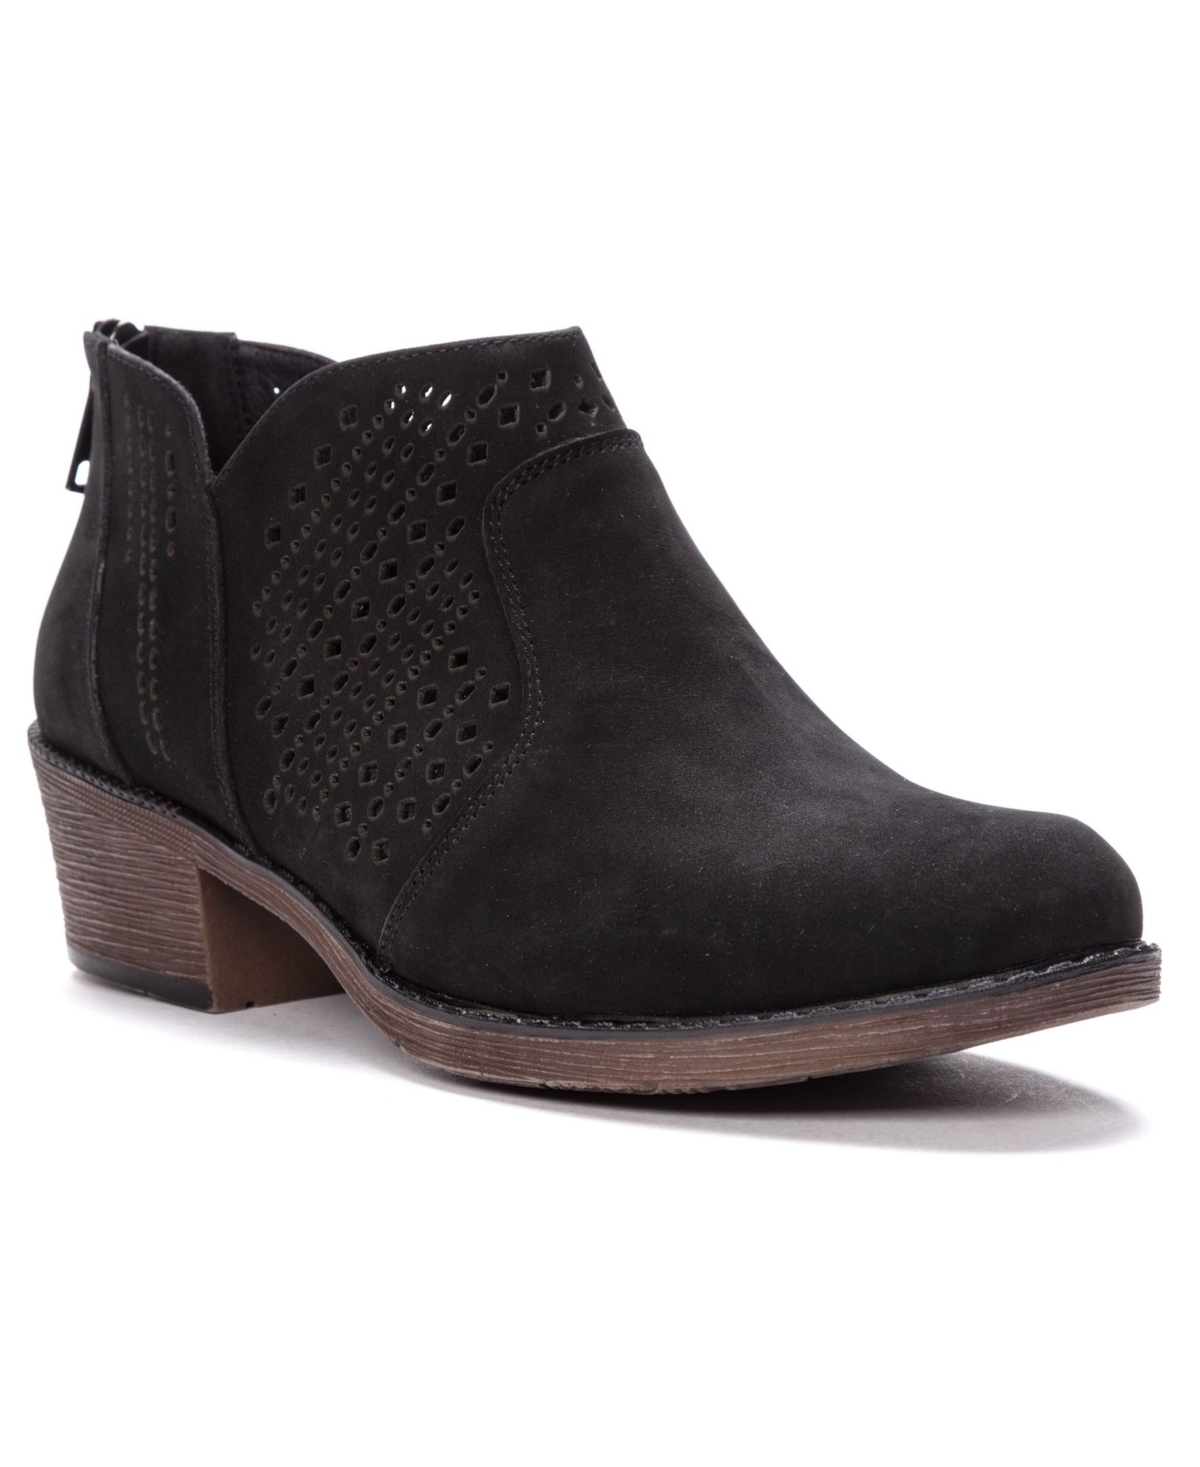 Women's Remy Ankle Booties - Black